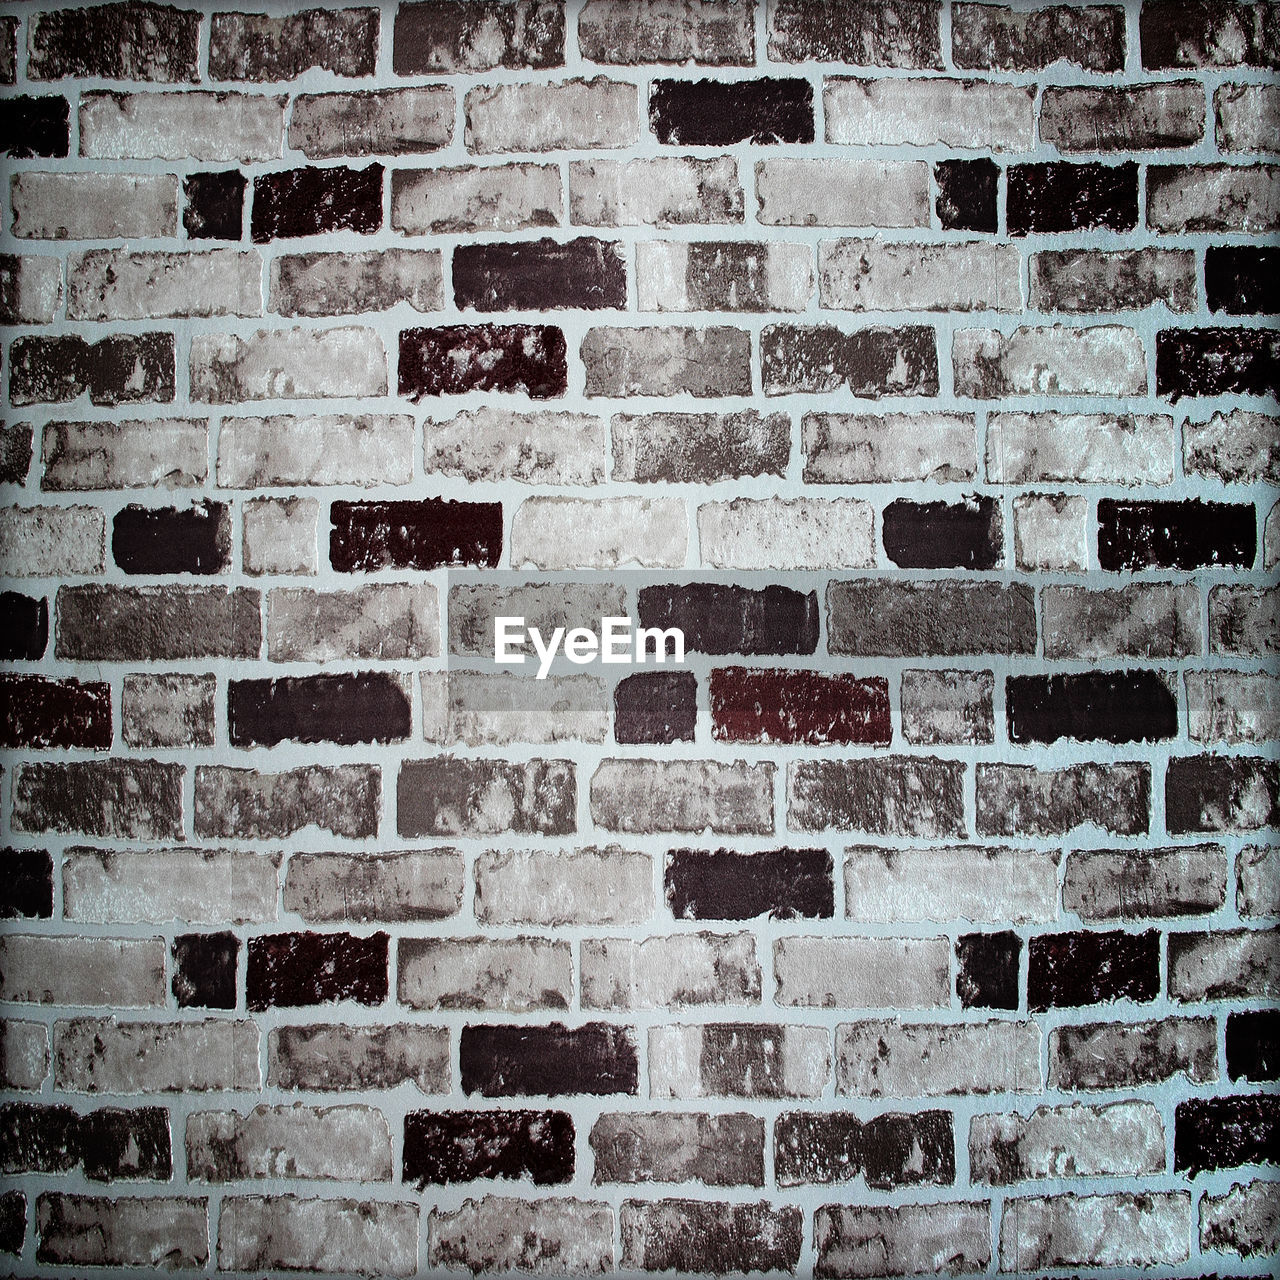 FULL FRAME SHOT OF BRICK WALL WITH BUILDING